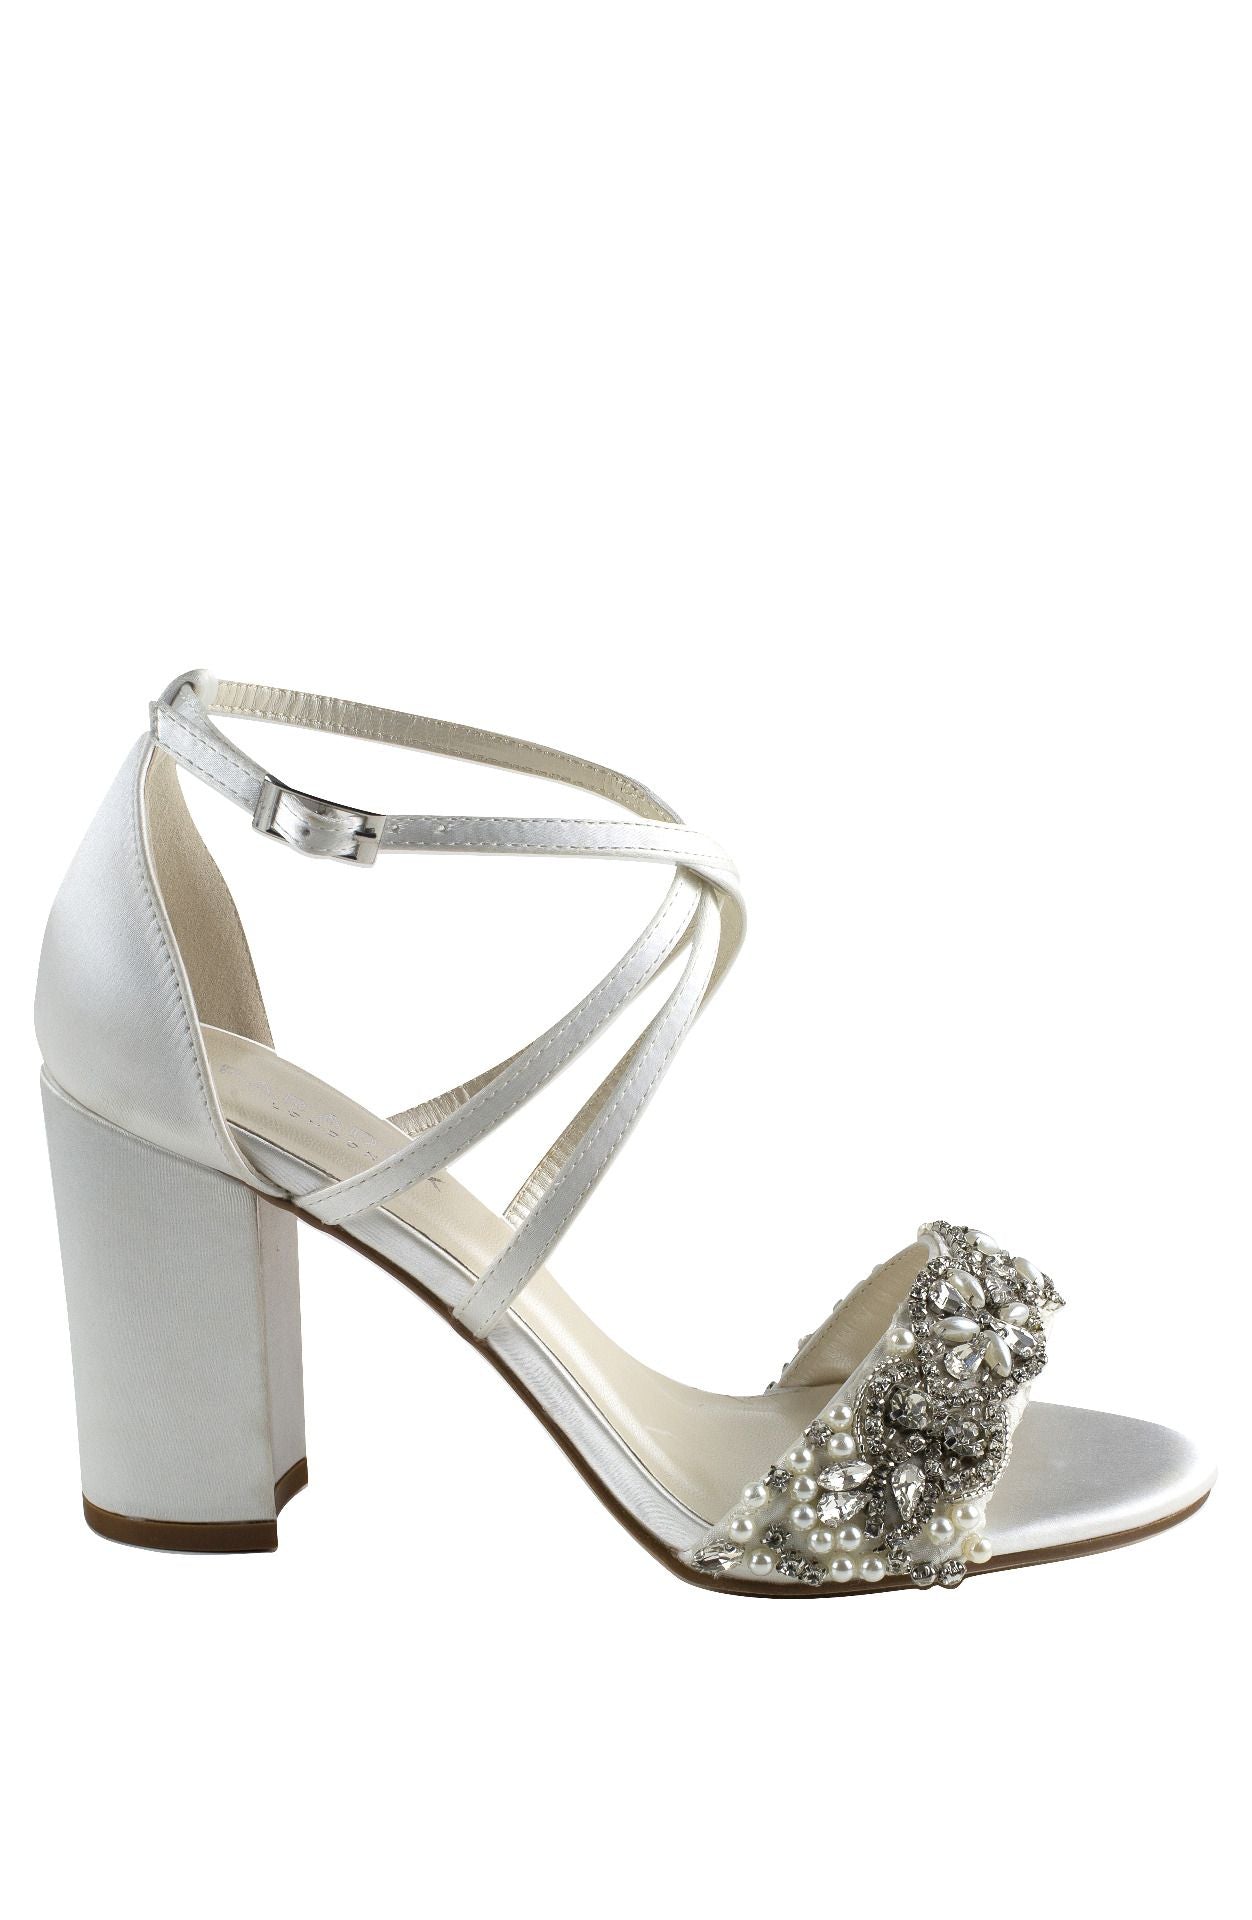 Side view Ivory Sandal with 2.75 inch block heel and decrotive strap